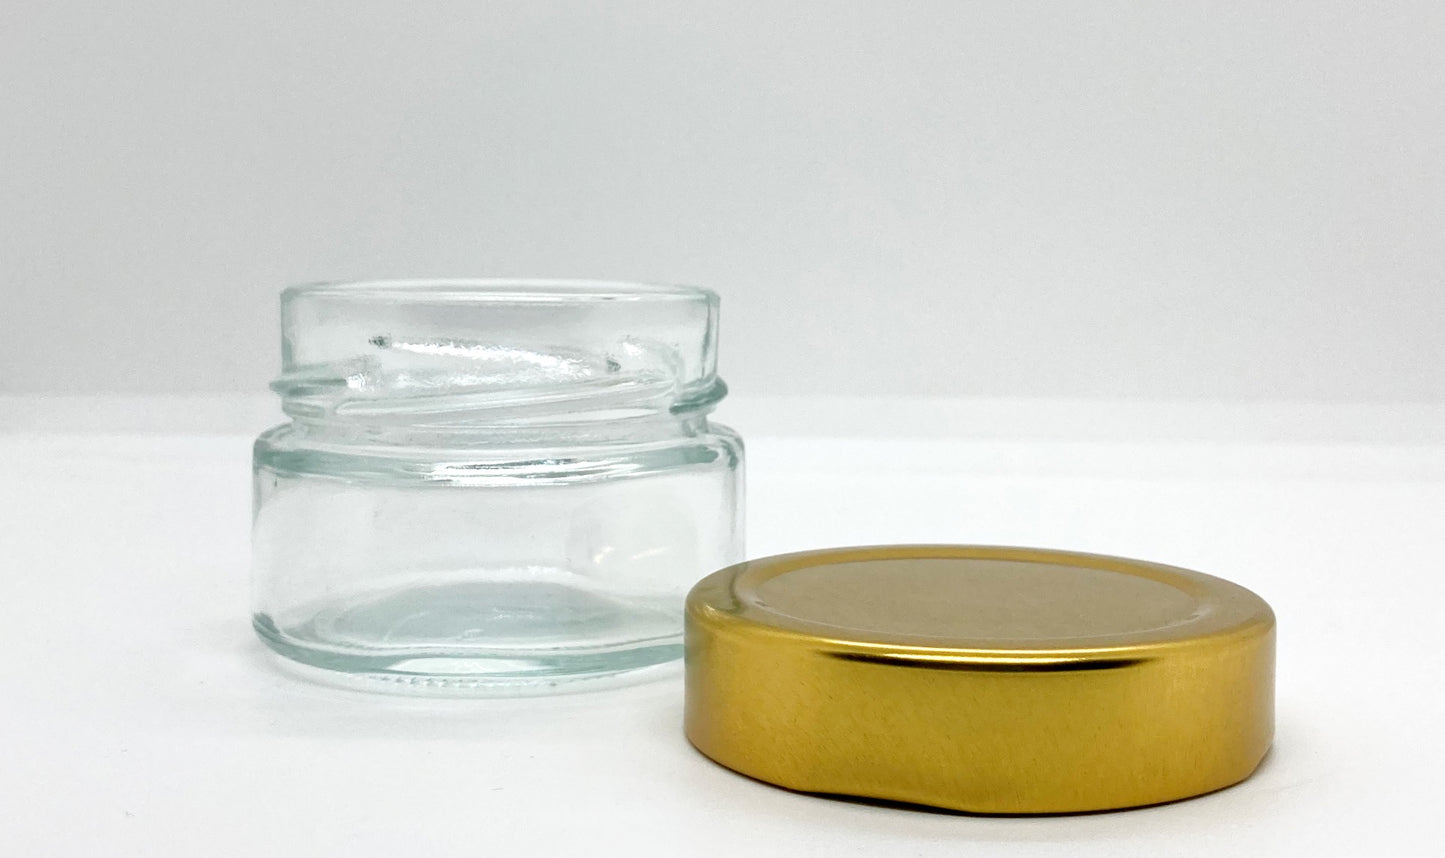 110mL. Clear Round Straight Cut Glass Jar and Deep Lid